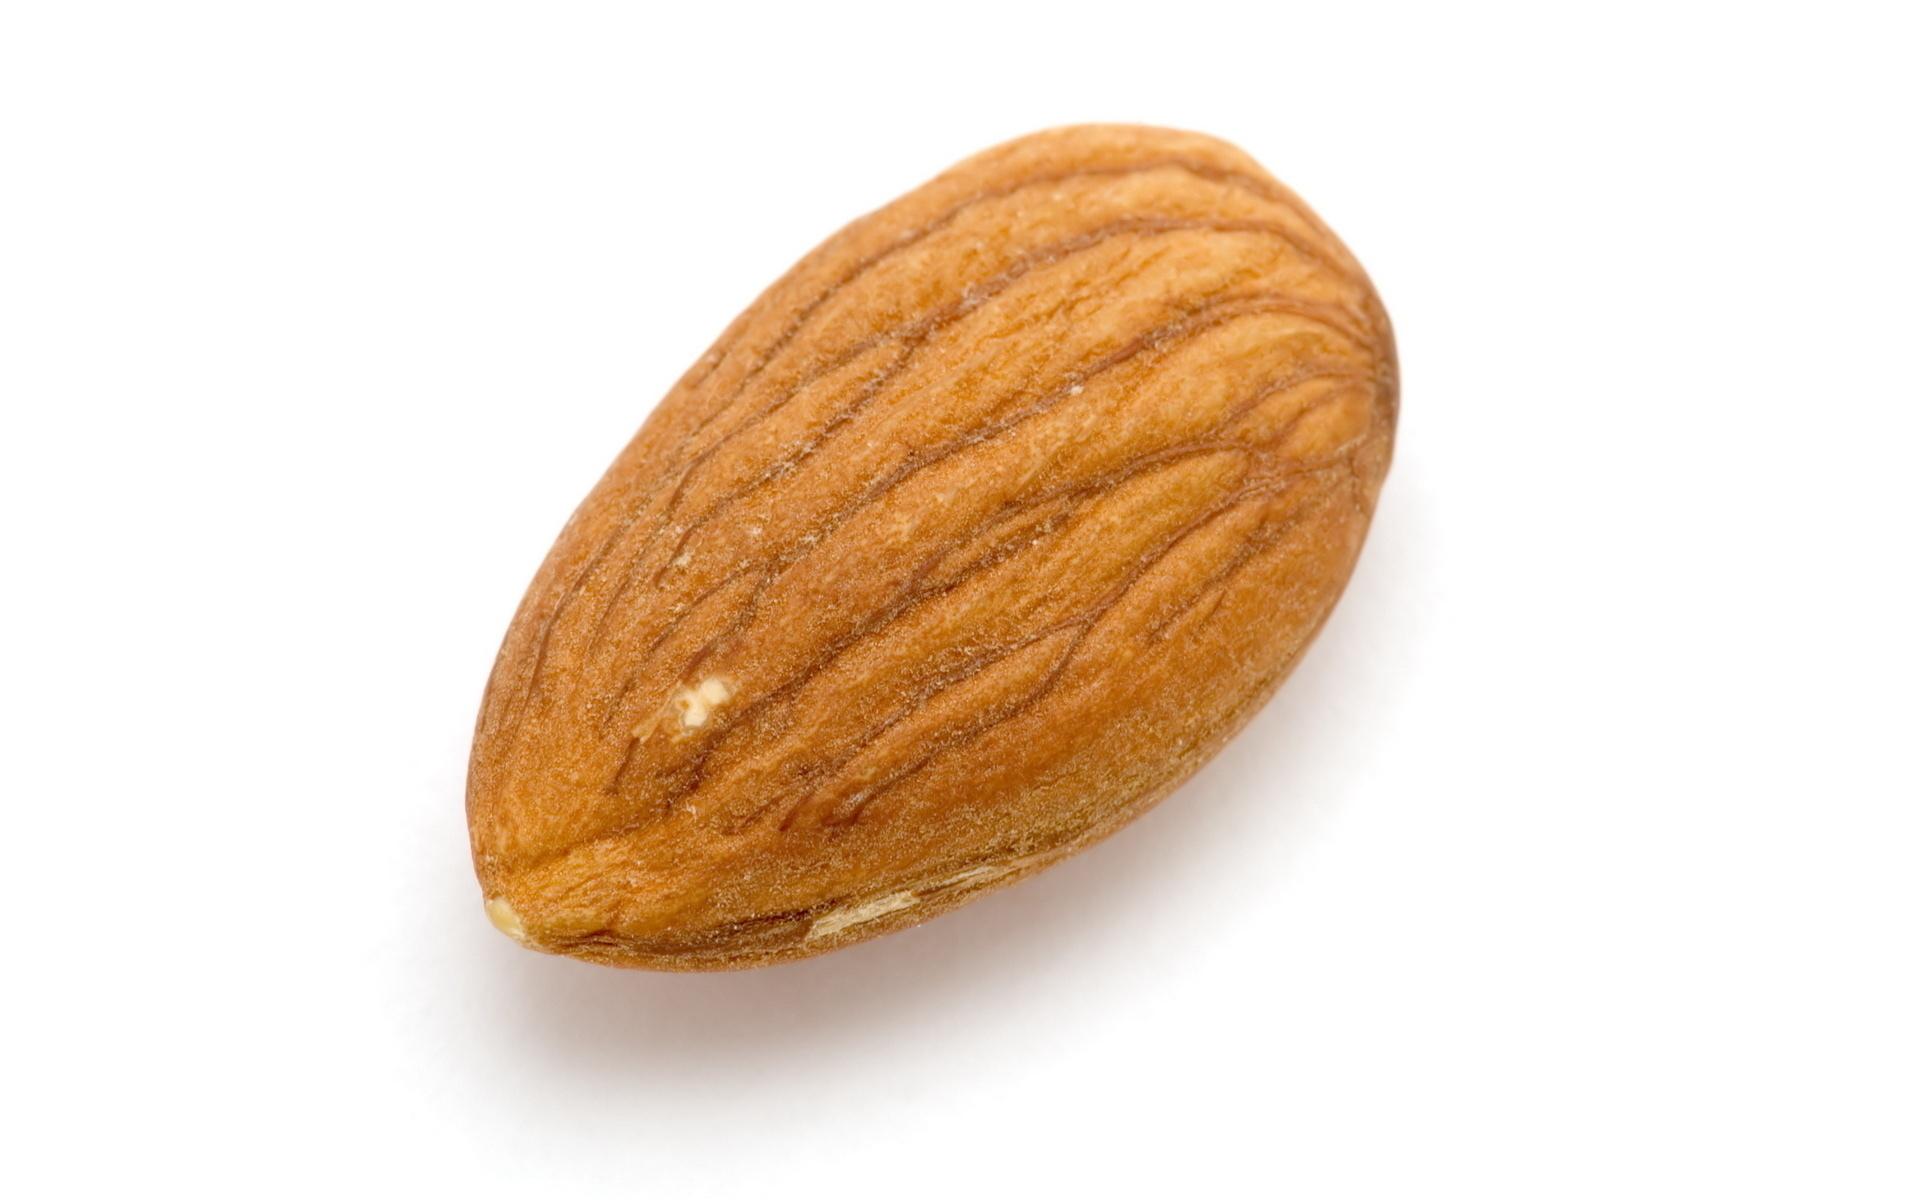 A singular almond by itself, with no almond friends